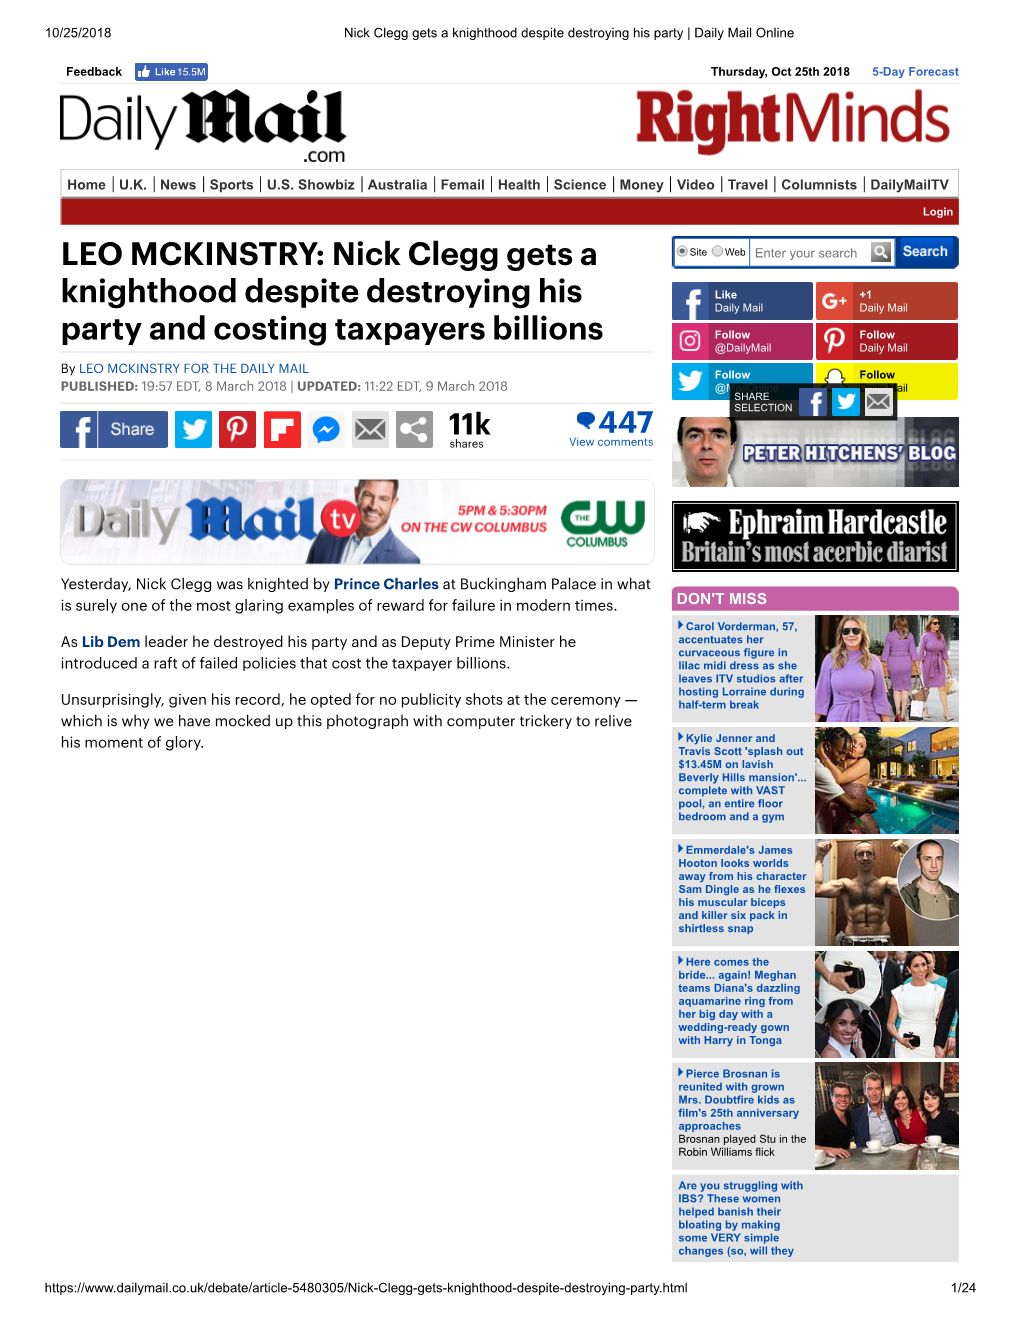 LEO MCKINSTRY: Nick Clegg Gets a Site Web Enter Your Search